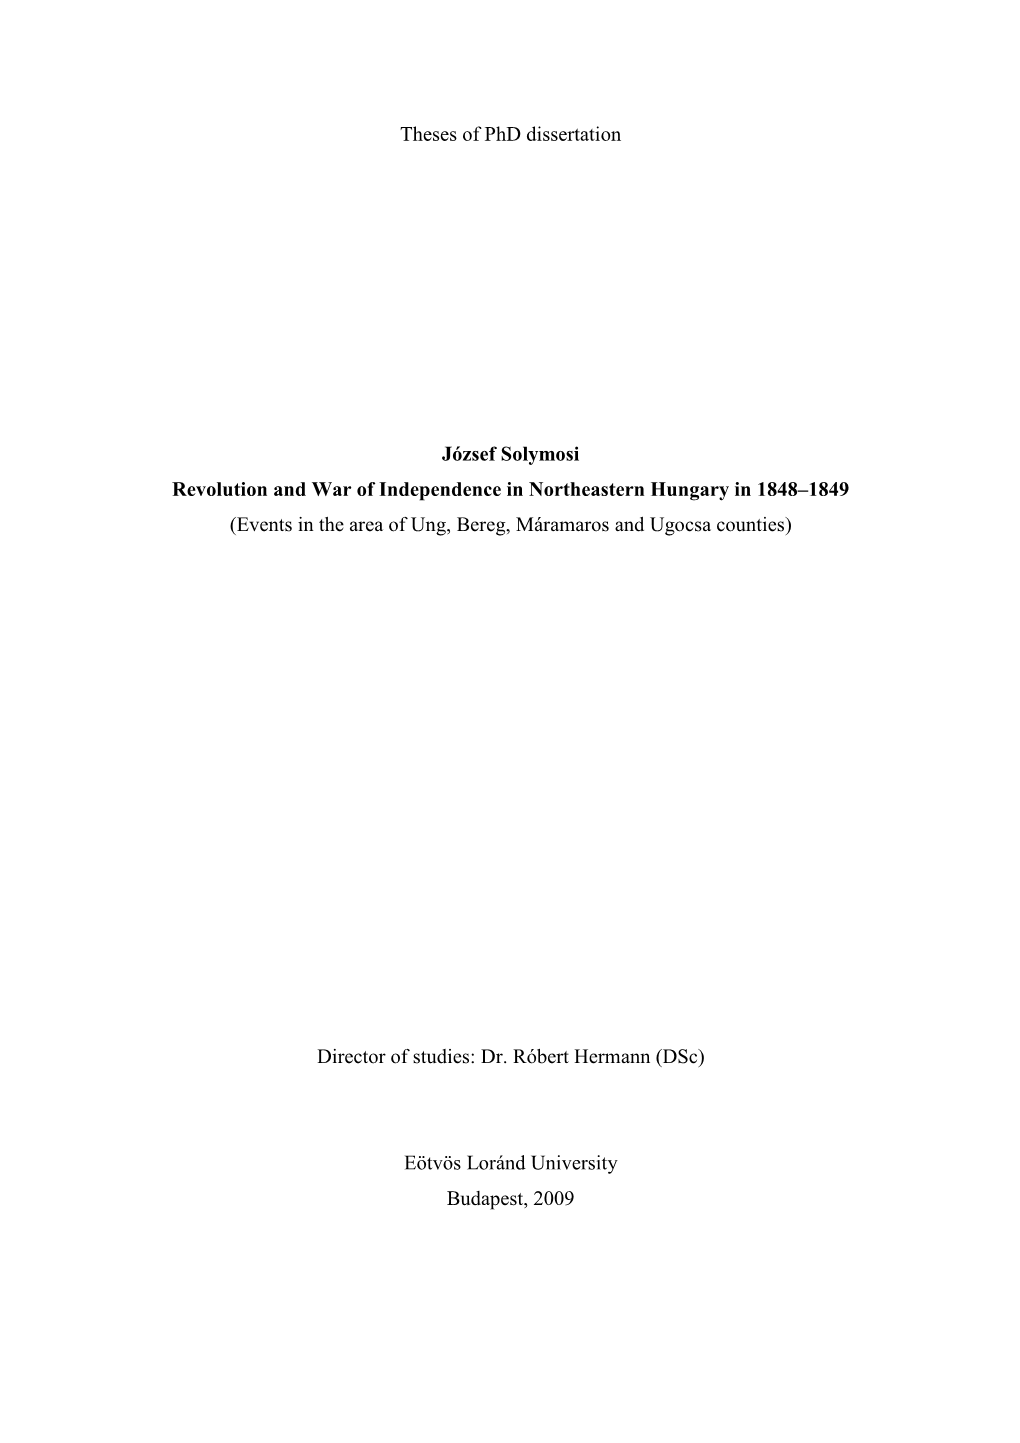 Theses of Phd Dissertation József Solymosi